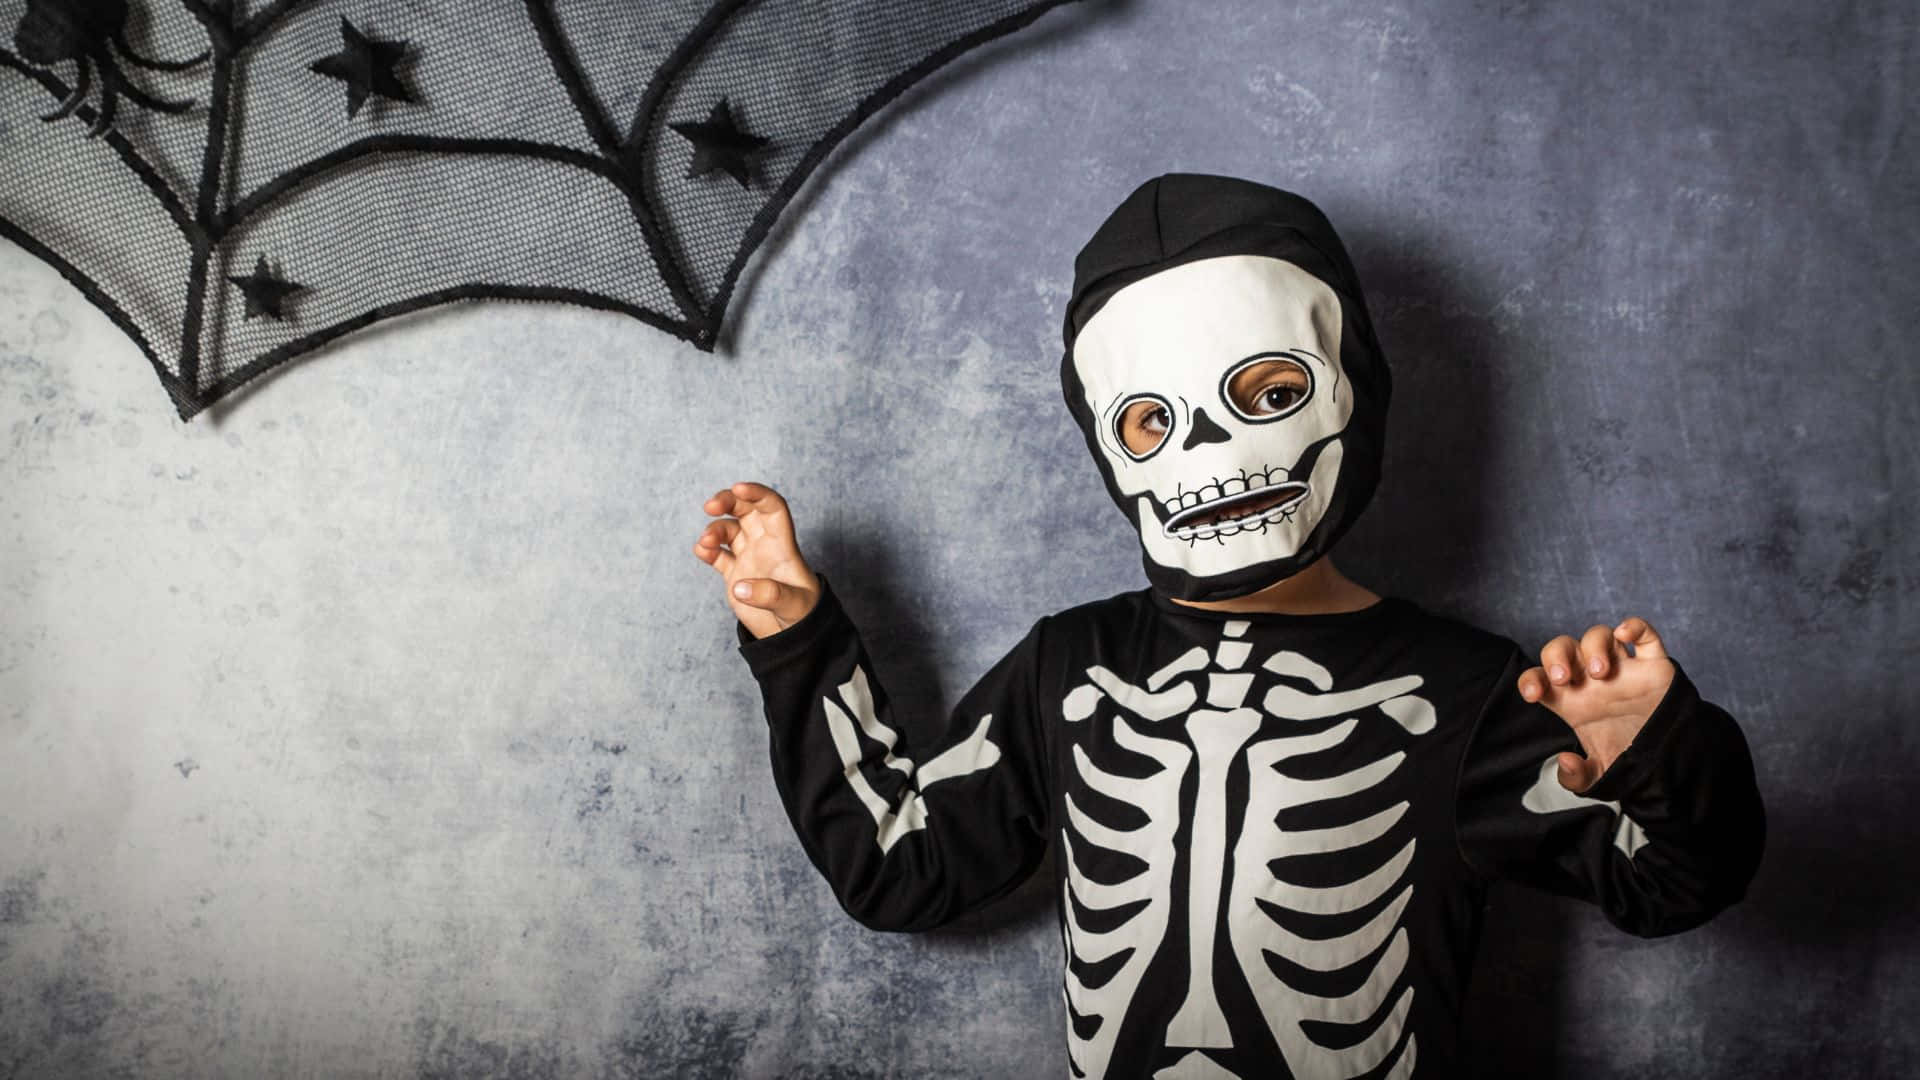 Celebrate Halloween in style with a spooky Skeleton Costume! Wallpaper